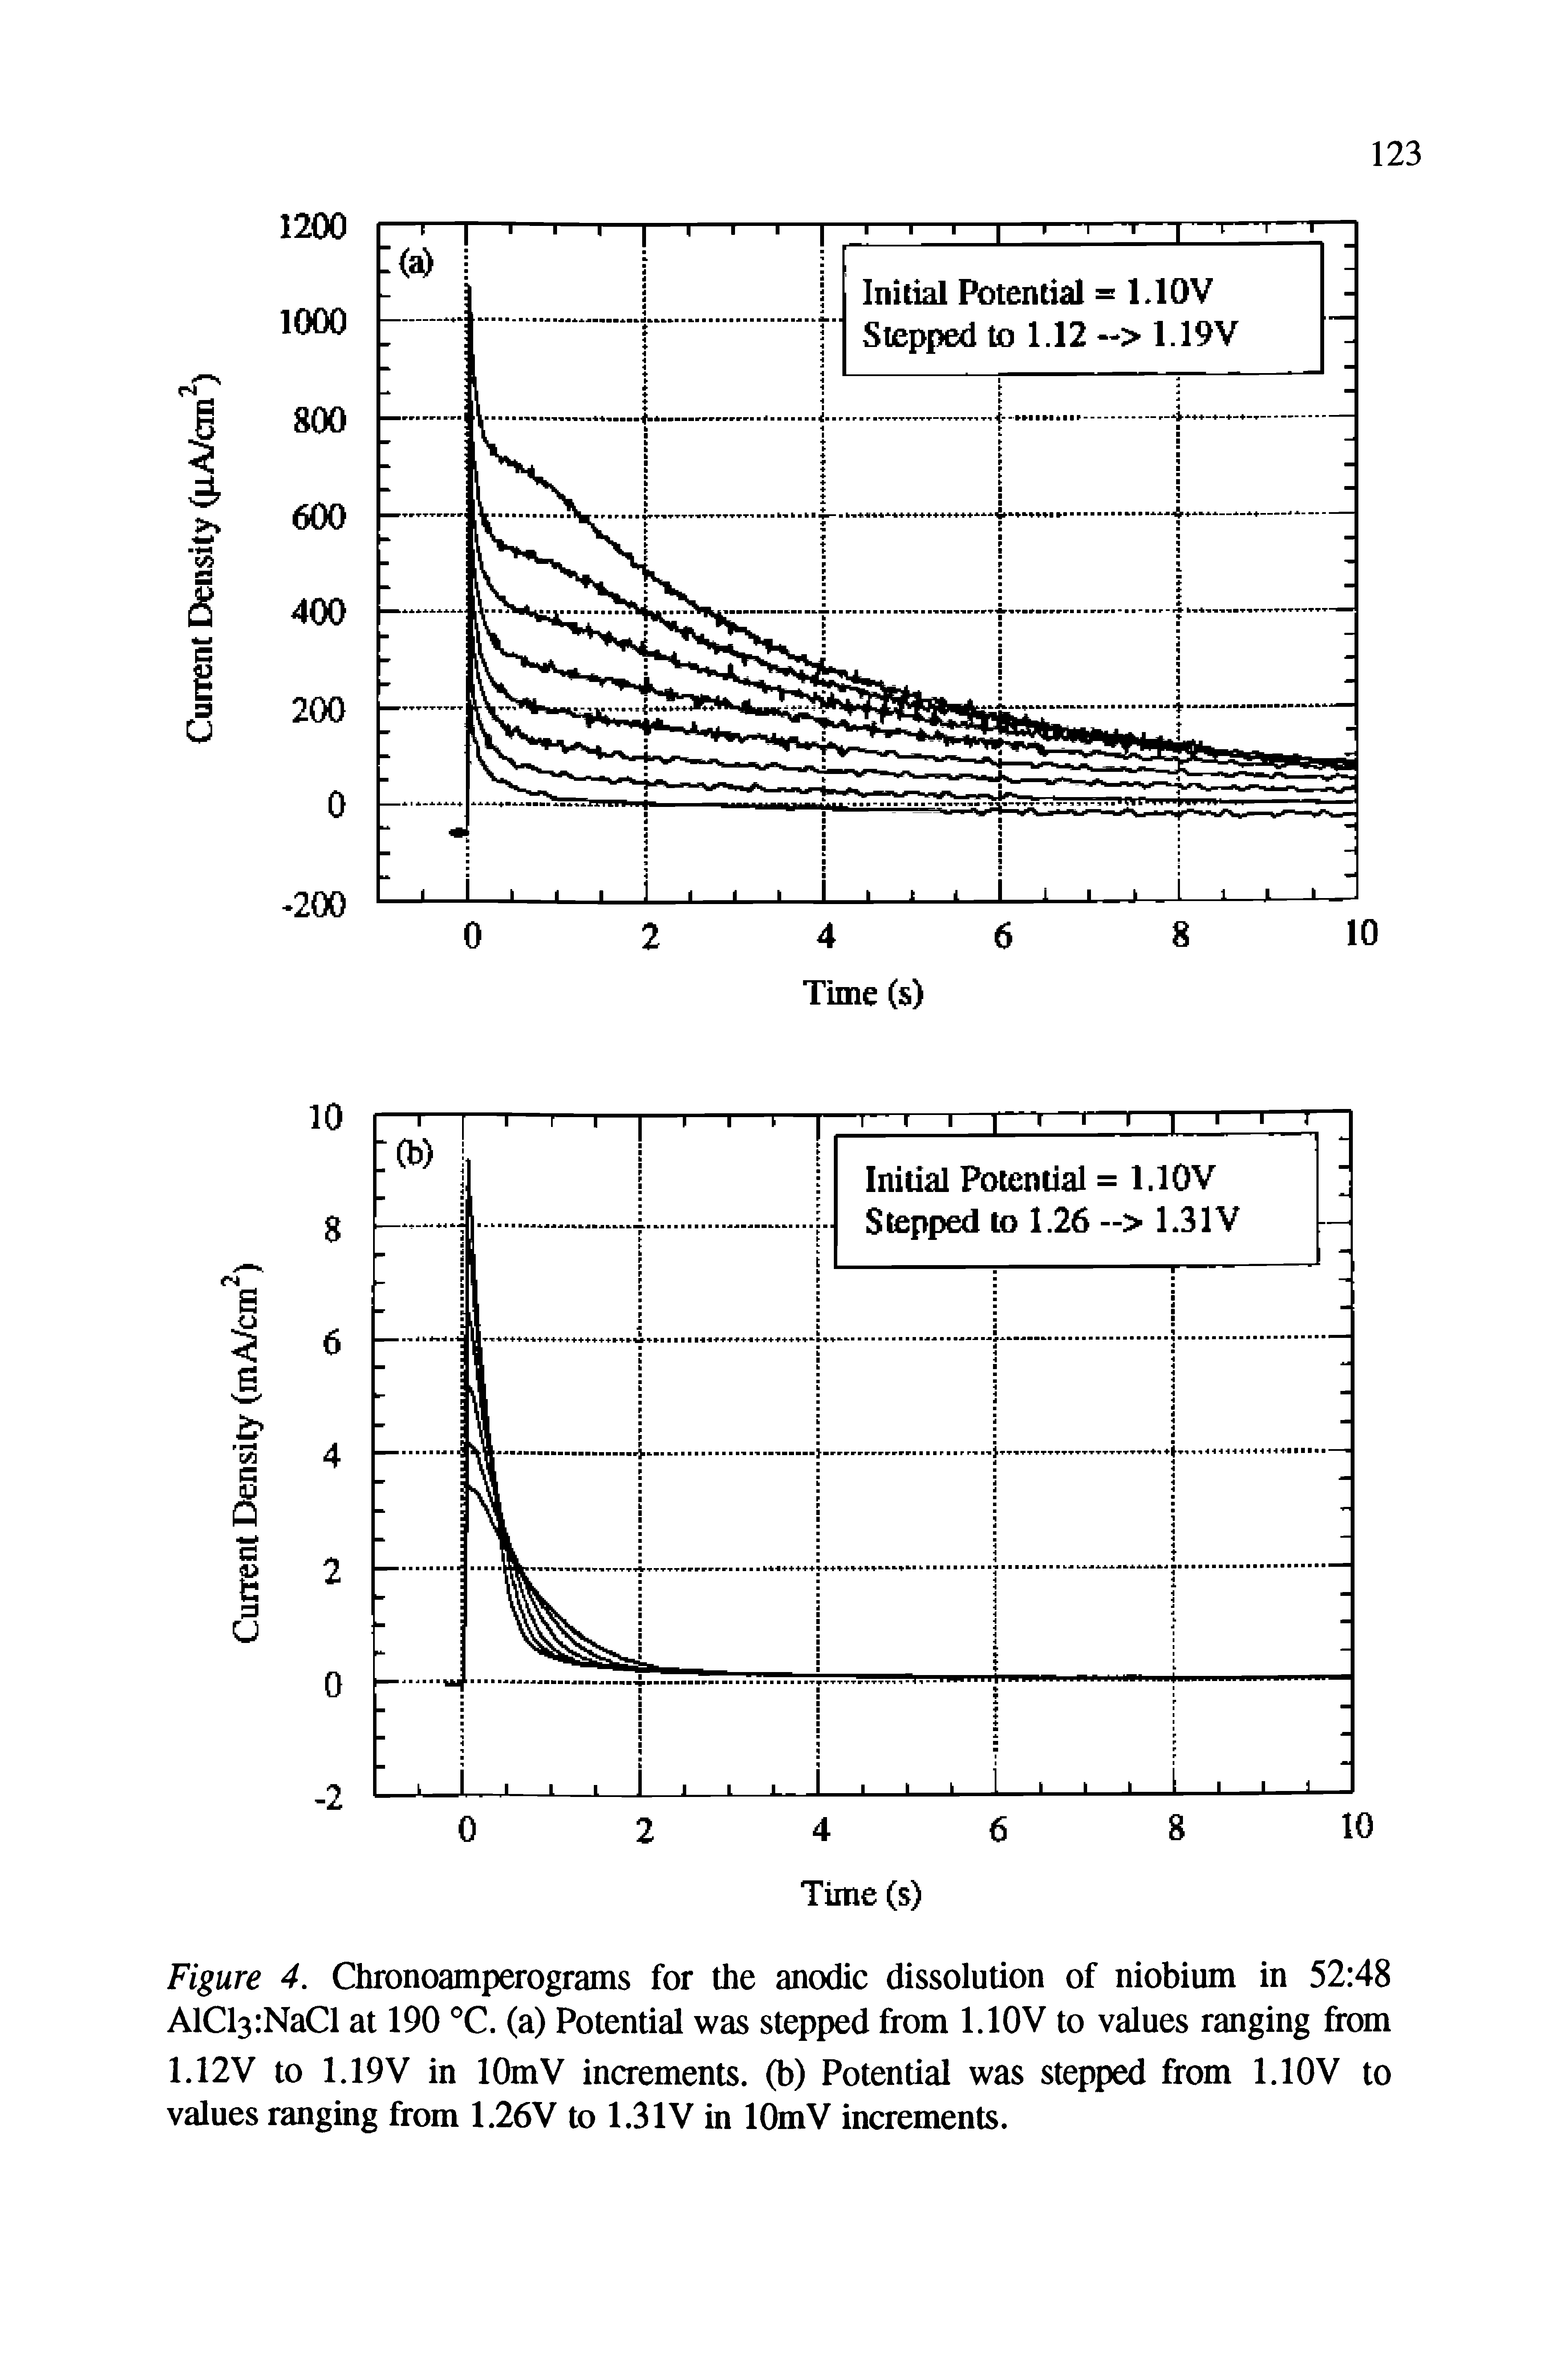 Figure 4. Chronoamperograms for the anodic dissolution of niobium in 52 48 AlCl3 NaCl at 190 °C. (a) Potential was stepped from I.IOV to values ranging from 1.12V to 1.19V in lOmV increments, (b) Potential was stepped from I.IOV to values ranging from 1.26V to 1.31V in lOmV increments.